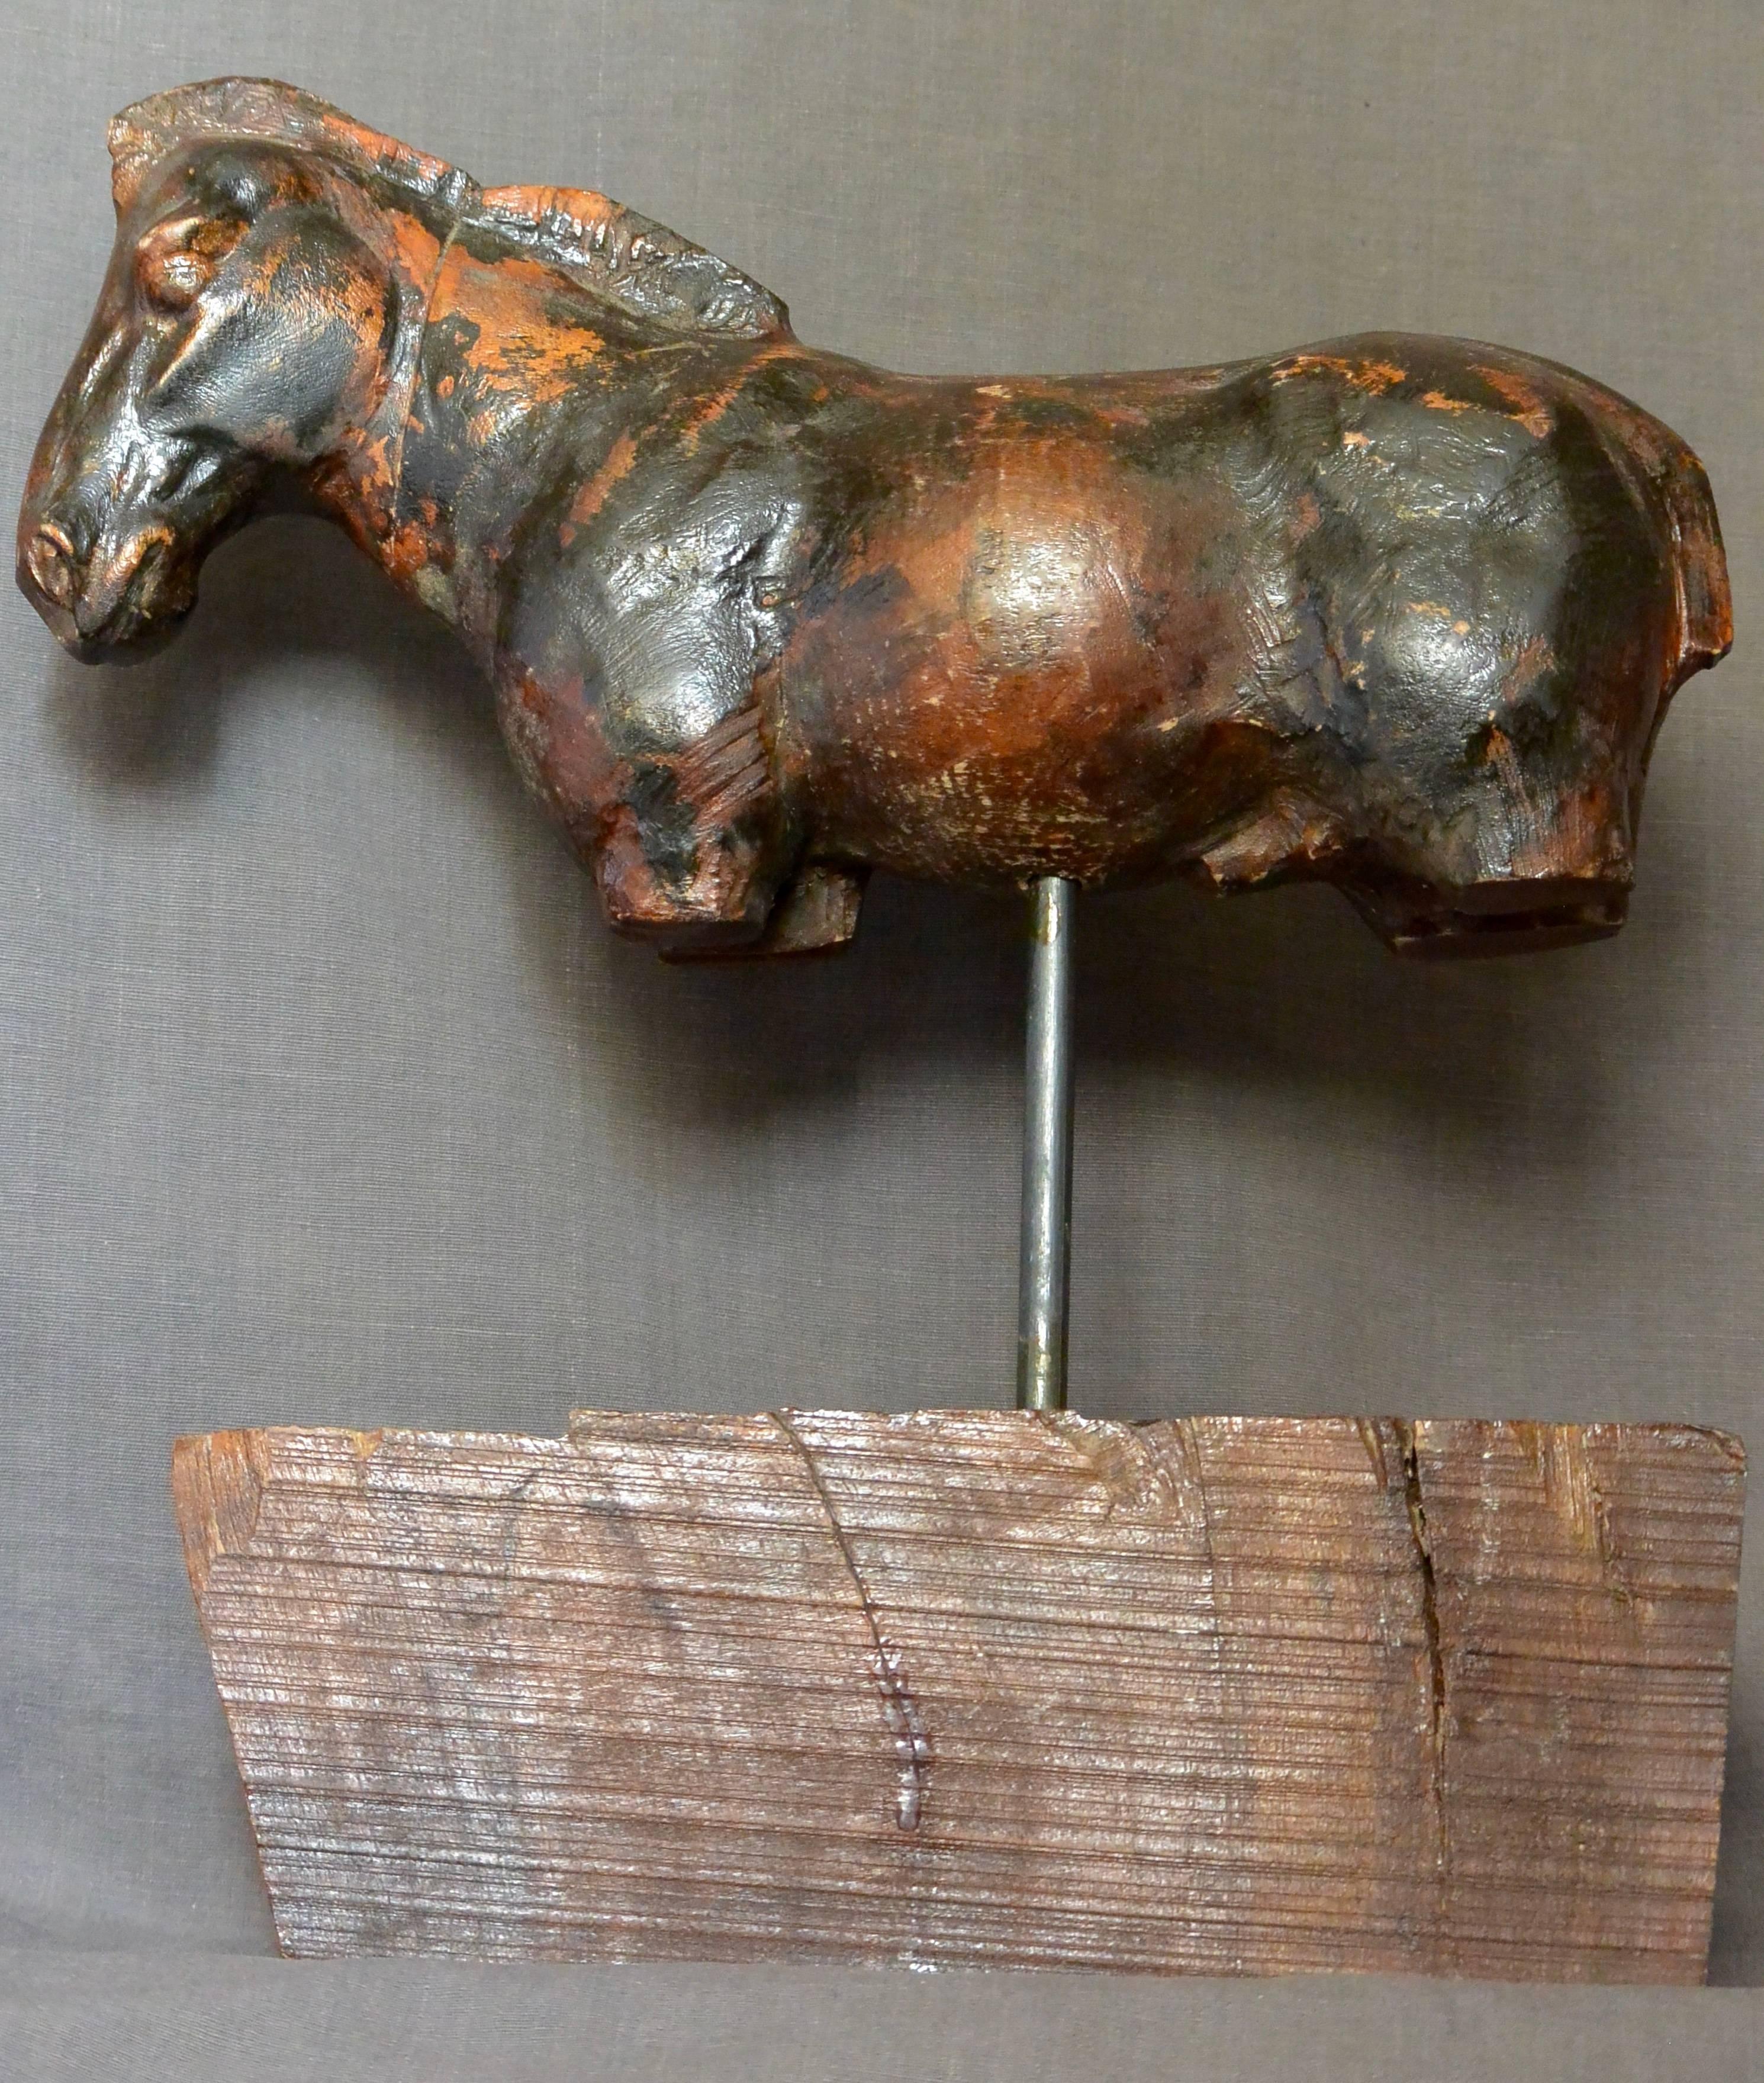 Italian carved poplar wood horse sculpture on walnut base, in original antique condition on antique walnut base. Italy, circa 1800. 
Dimensions: 15” H x 13” L x 5” W at base.
 